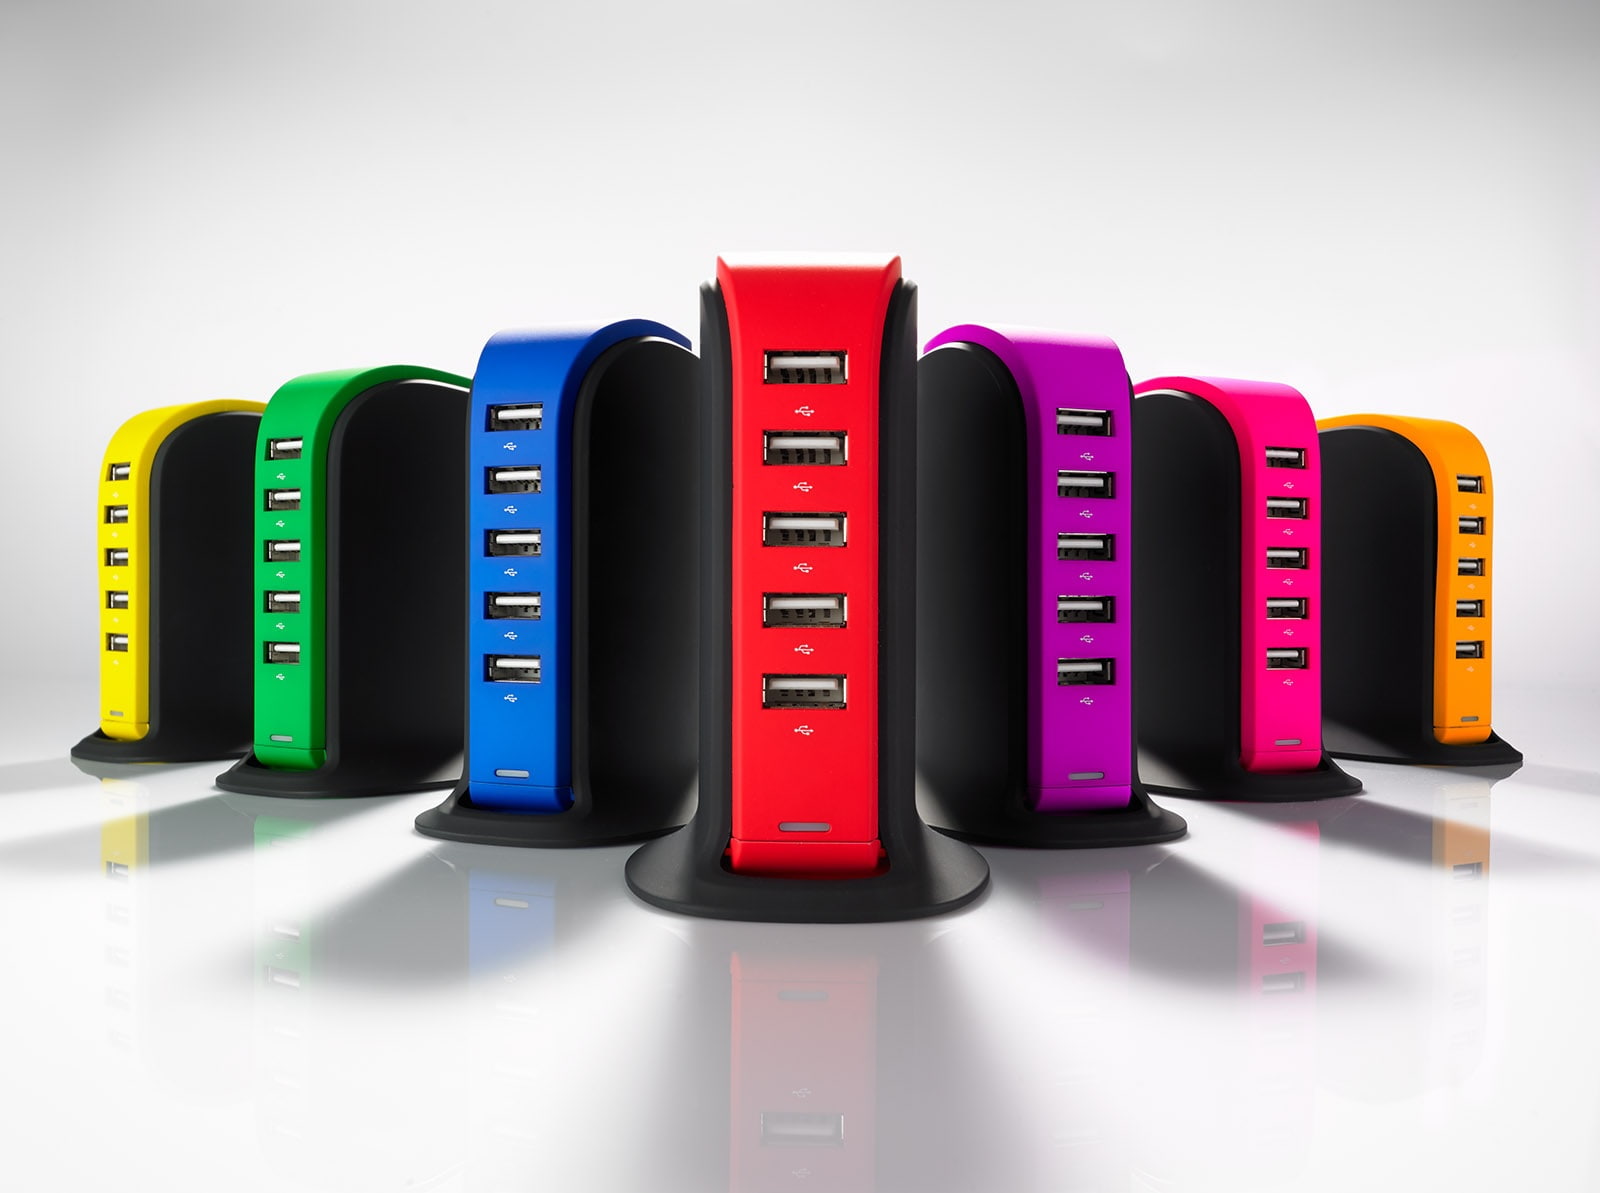 Desk Charger Power Tower PT50 - The charging station with 5 USB ports